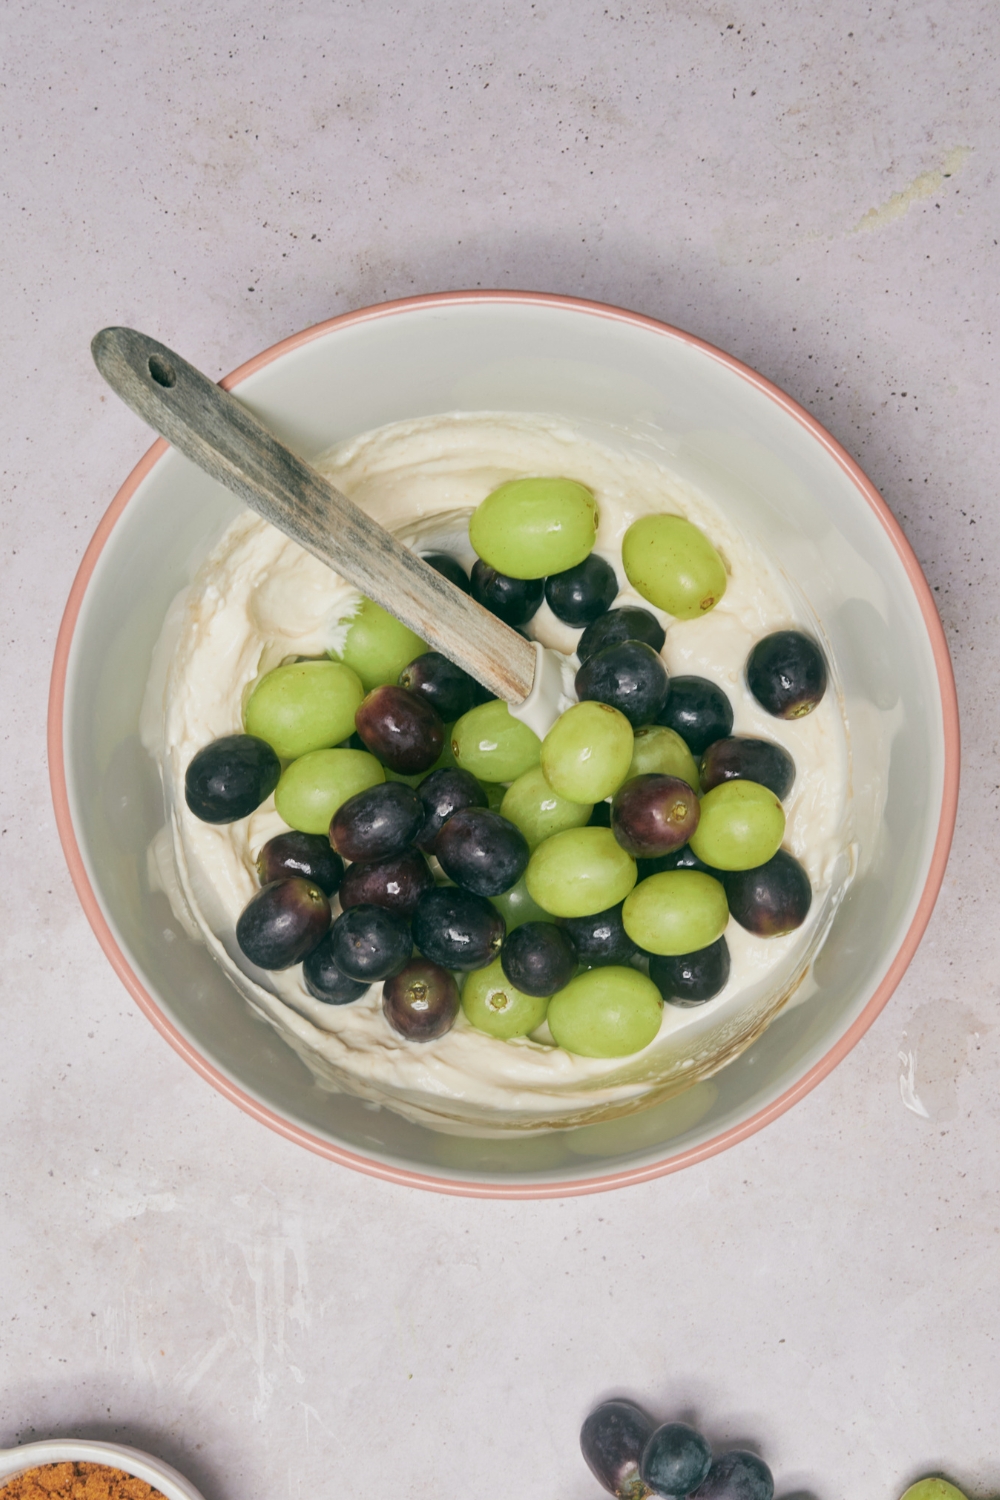 A mixing bowl with grapes being added to the cream cheese mixture.